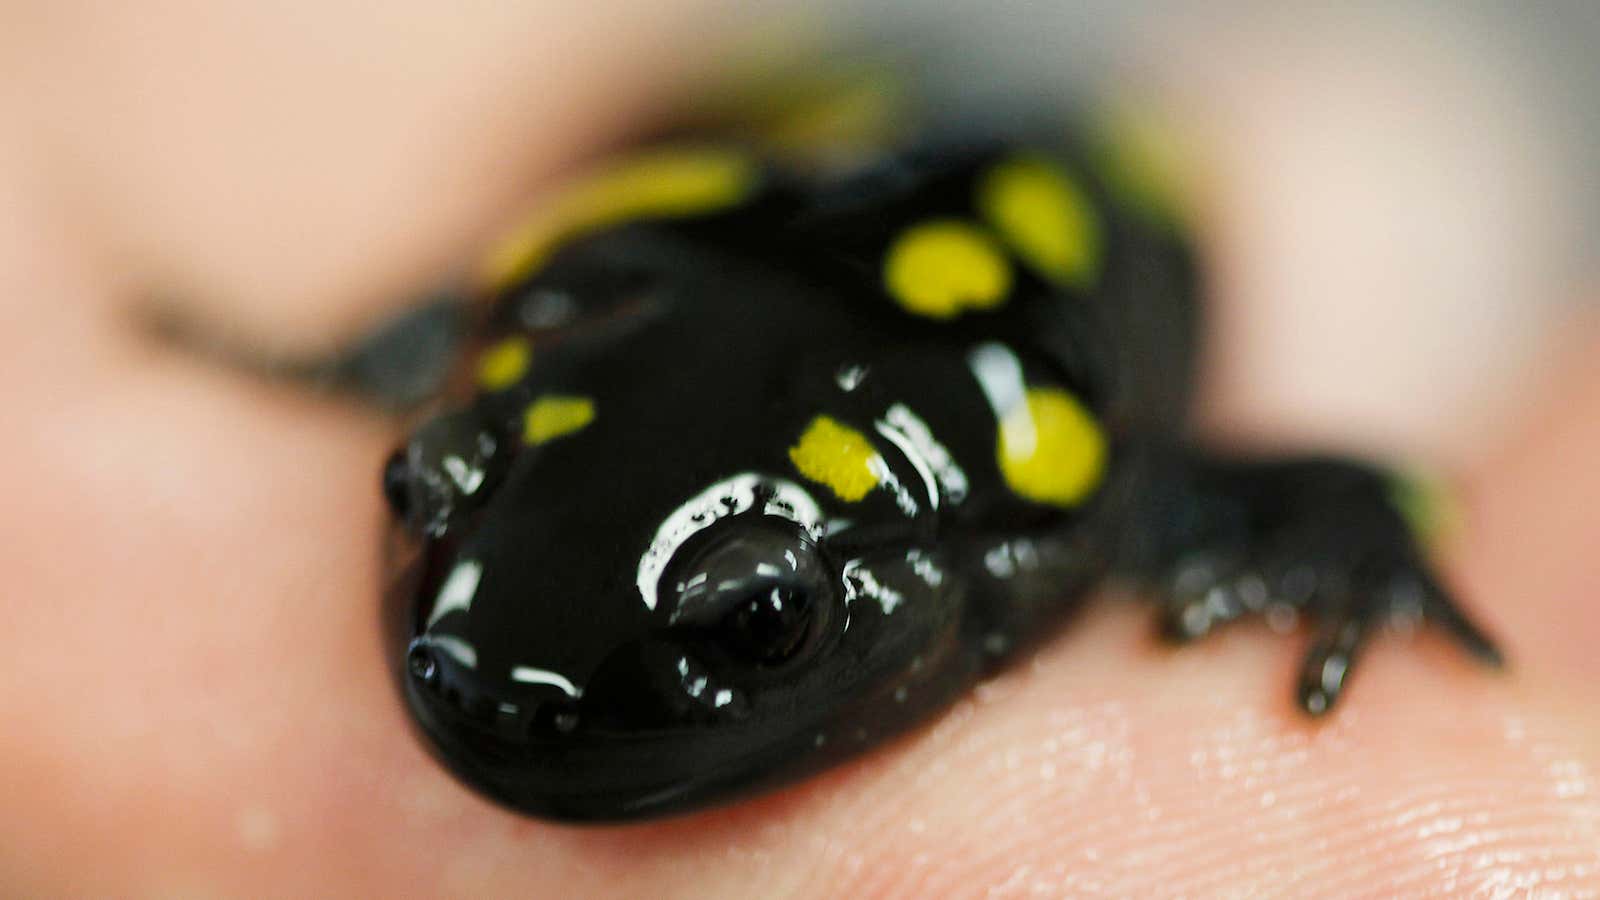 Hanging out with amphibians can lead to important revelations.